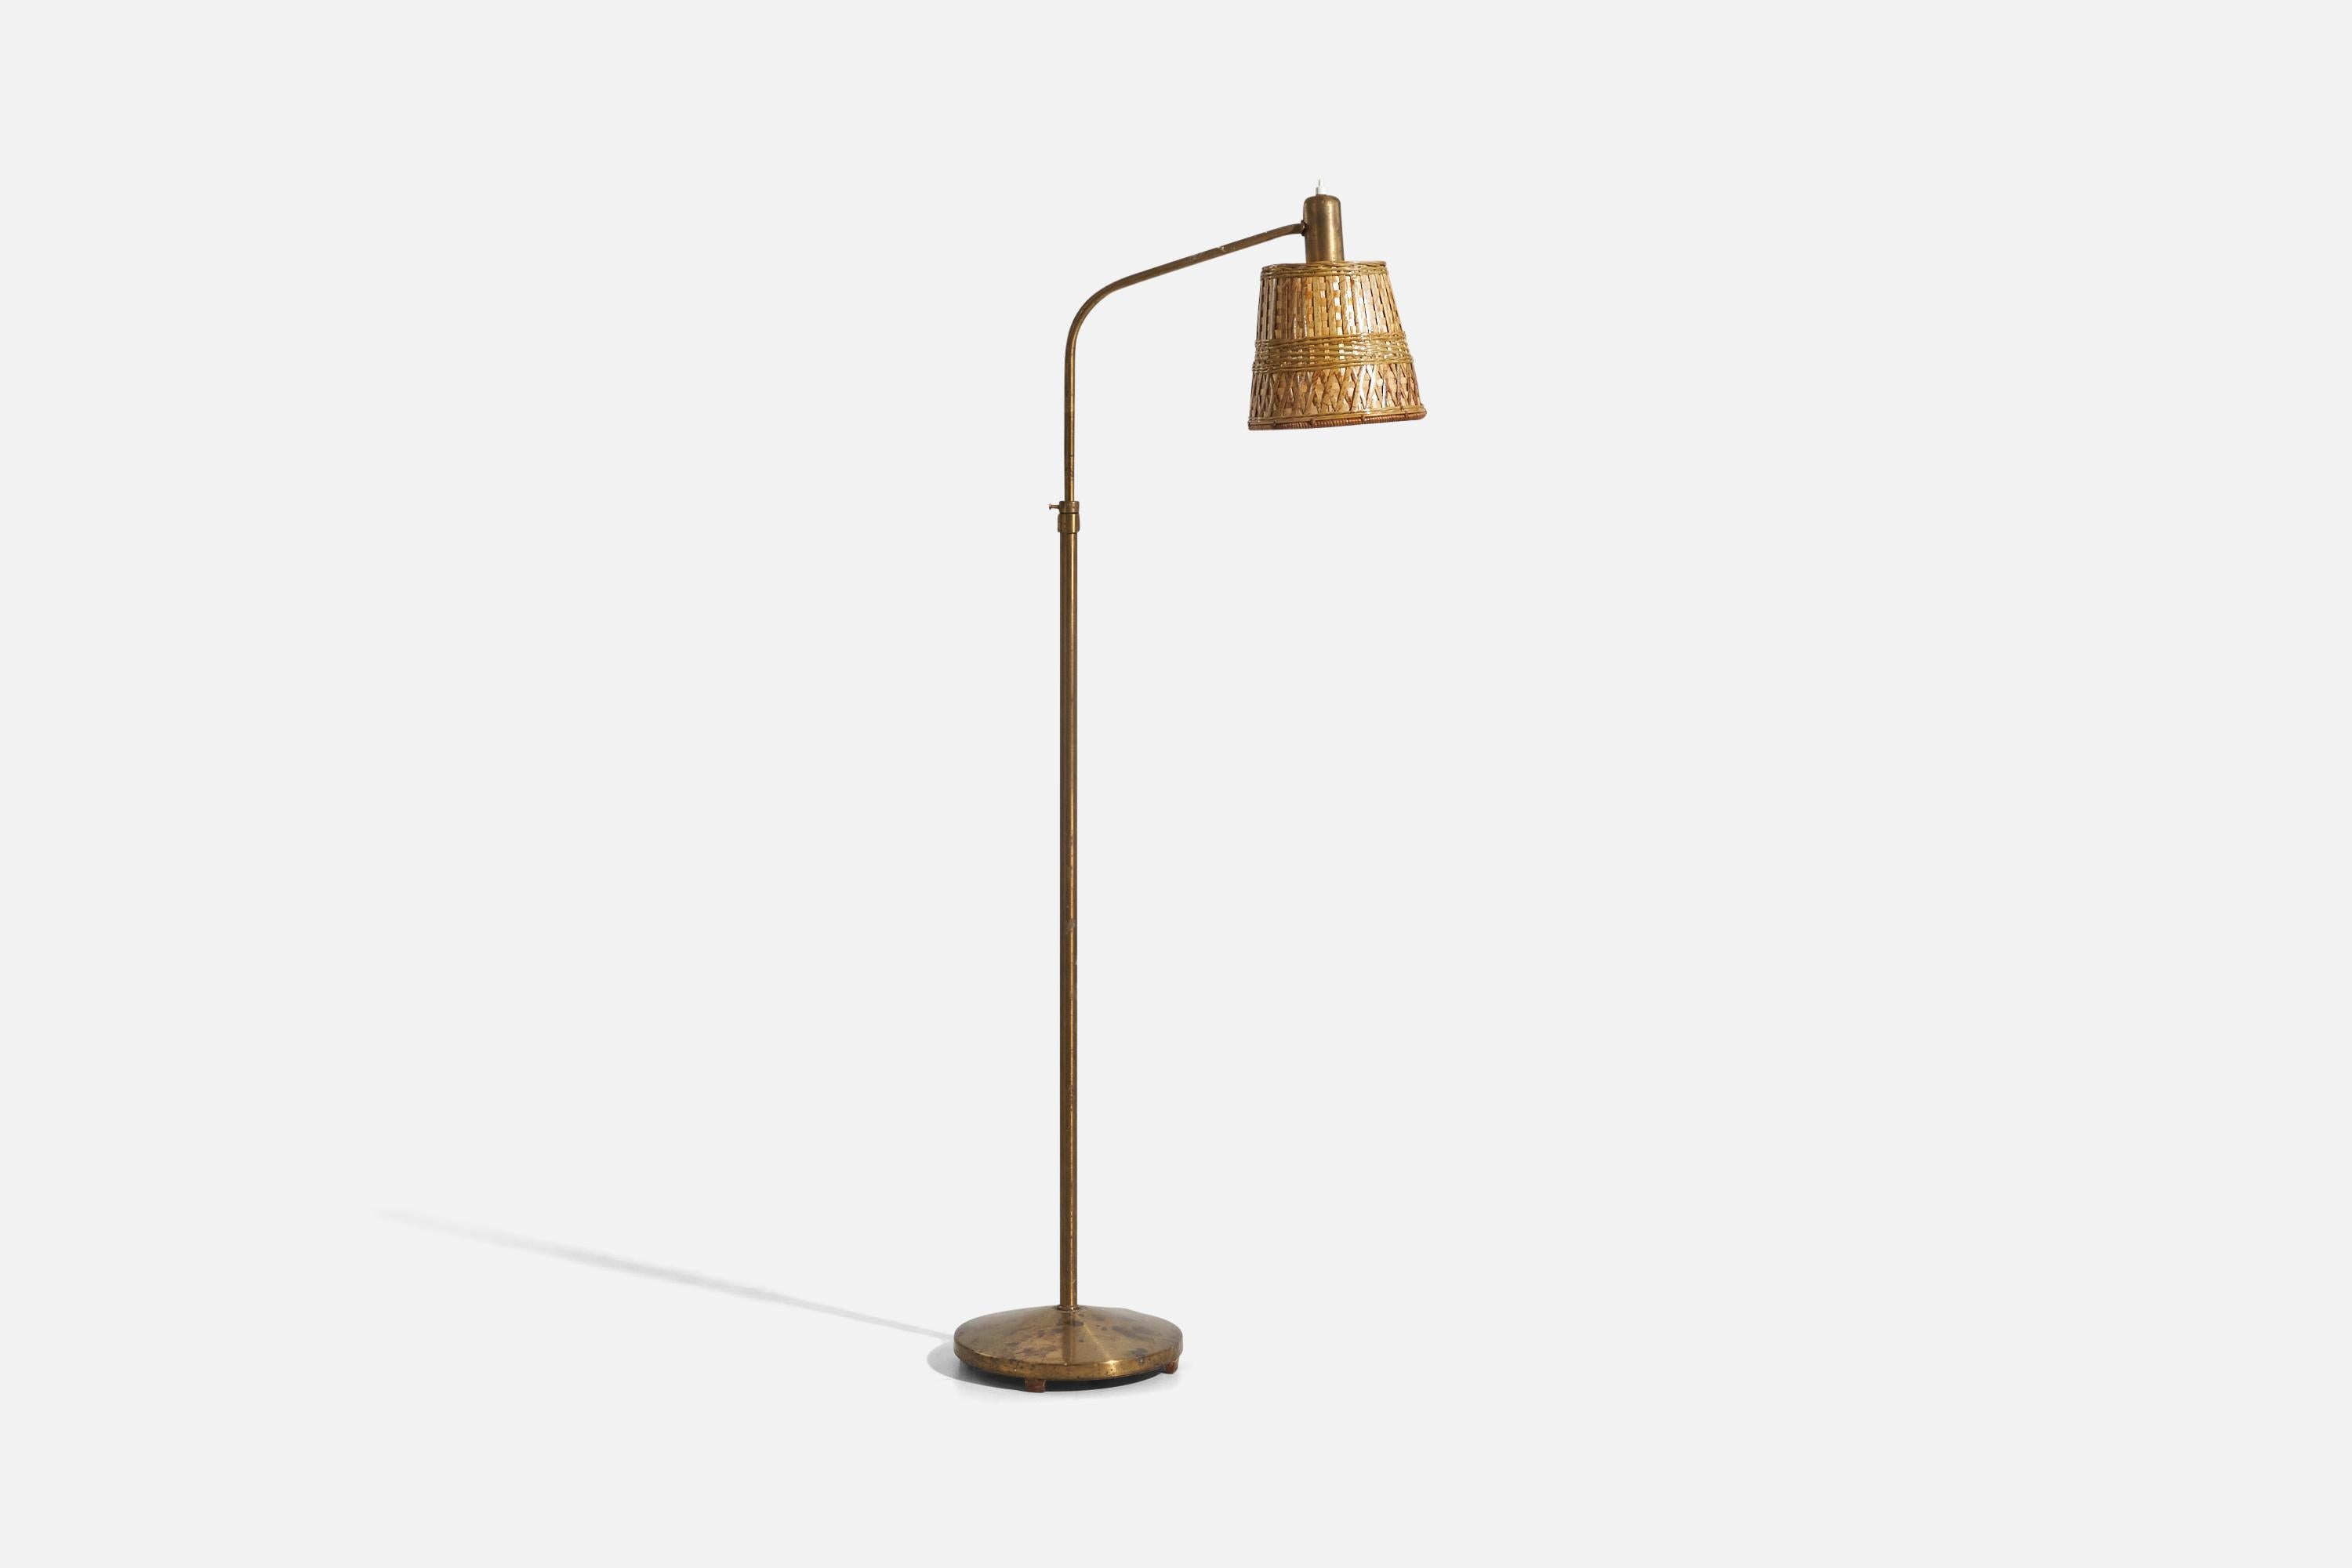 A brass and rattan, adjustable floor lamp designed by Hans Bergström and produced by ASEA, Sweden, 1940s.

Dimensions variable, measured as illustrated in first image.

Sold with Lampshade(s). Dimensions stated are of floor lamp with shade(s).